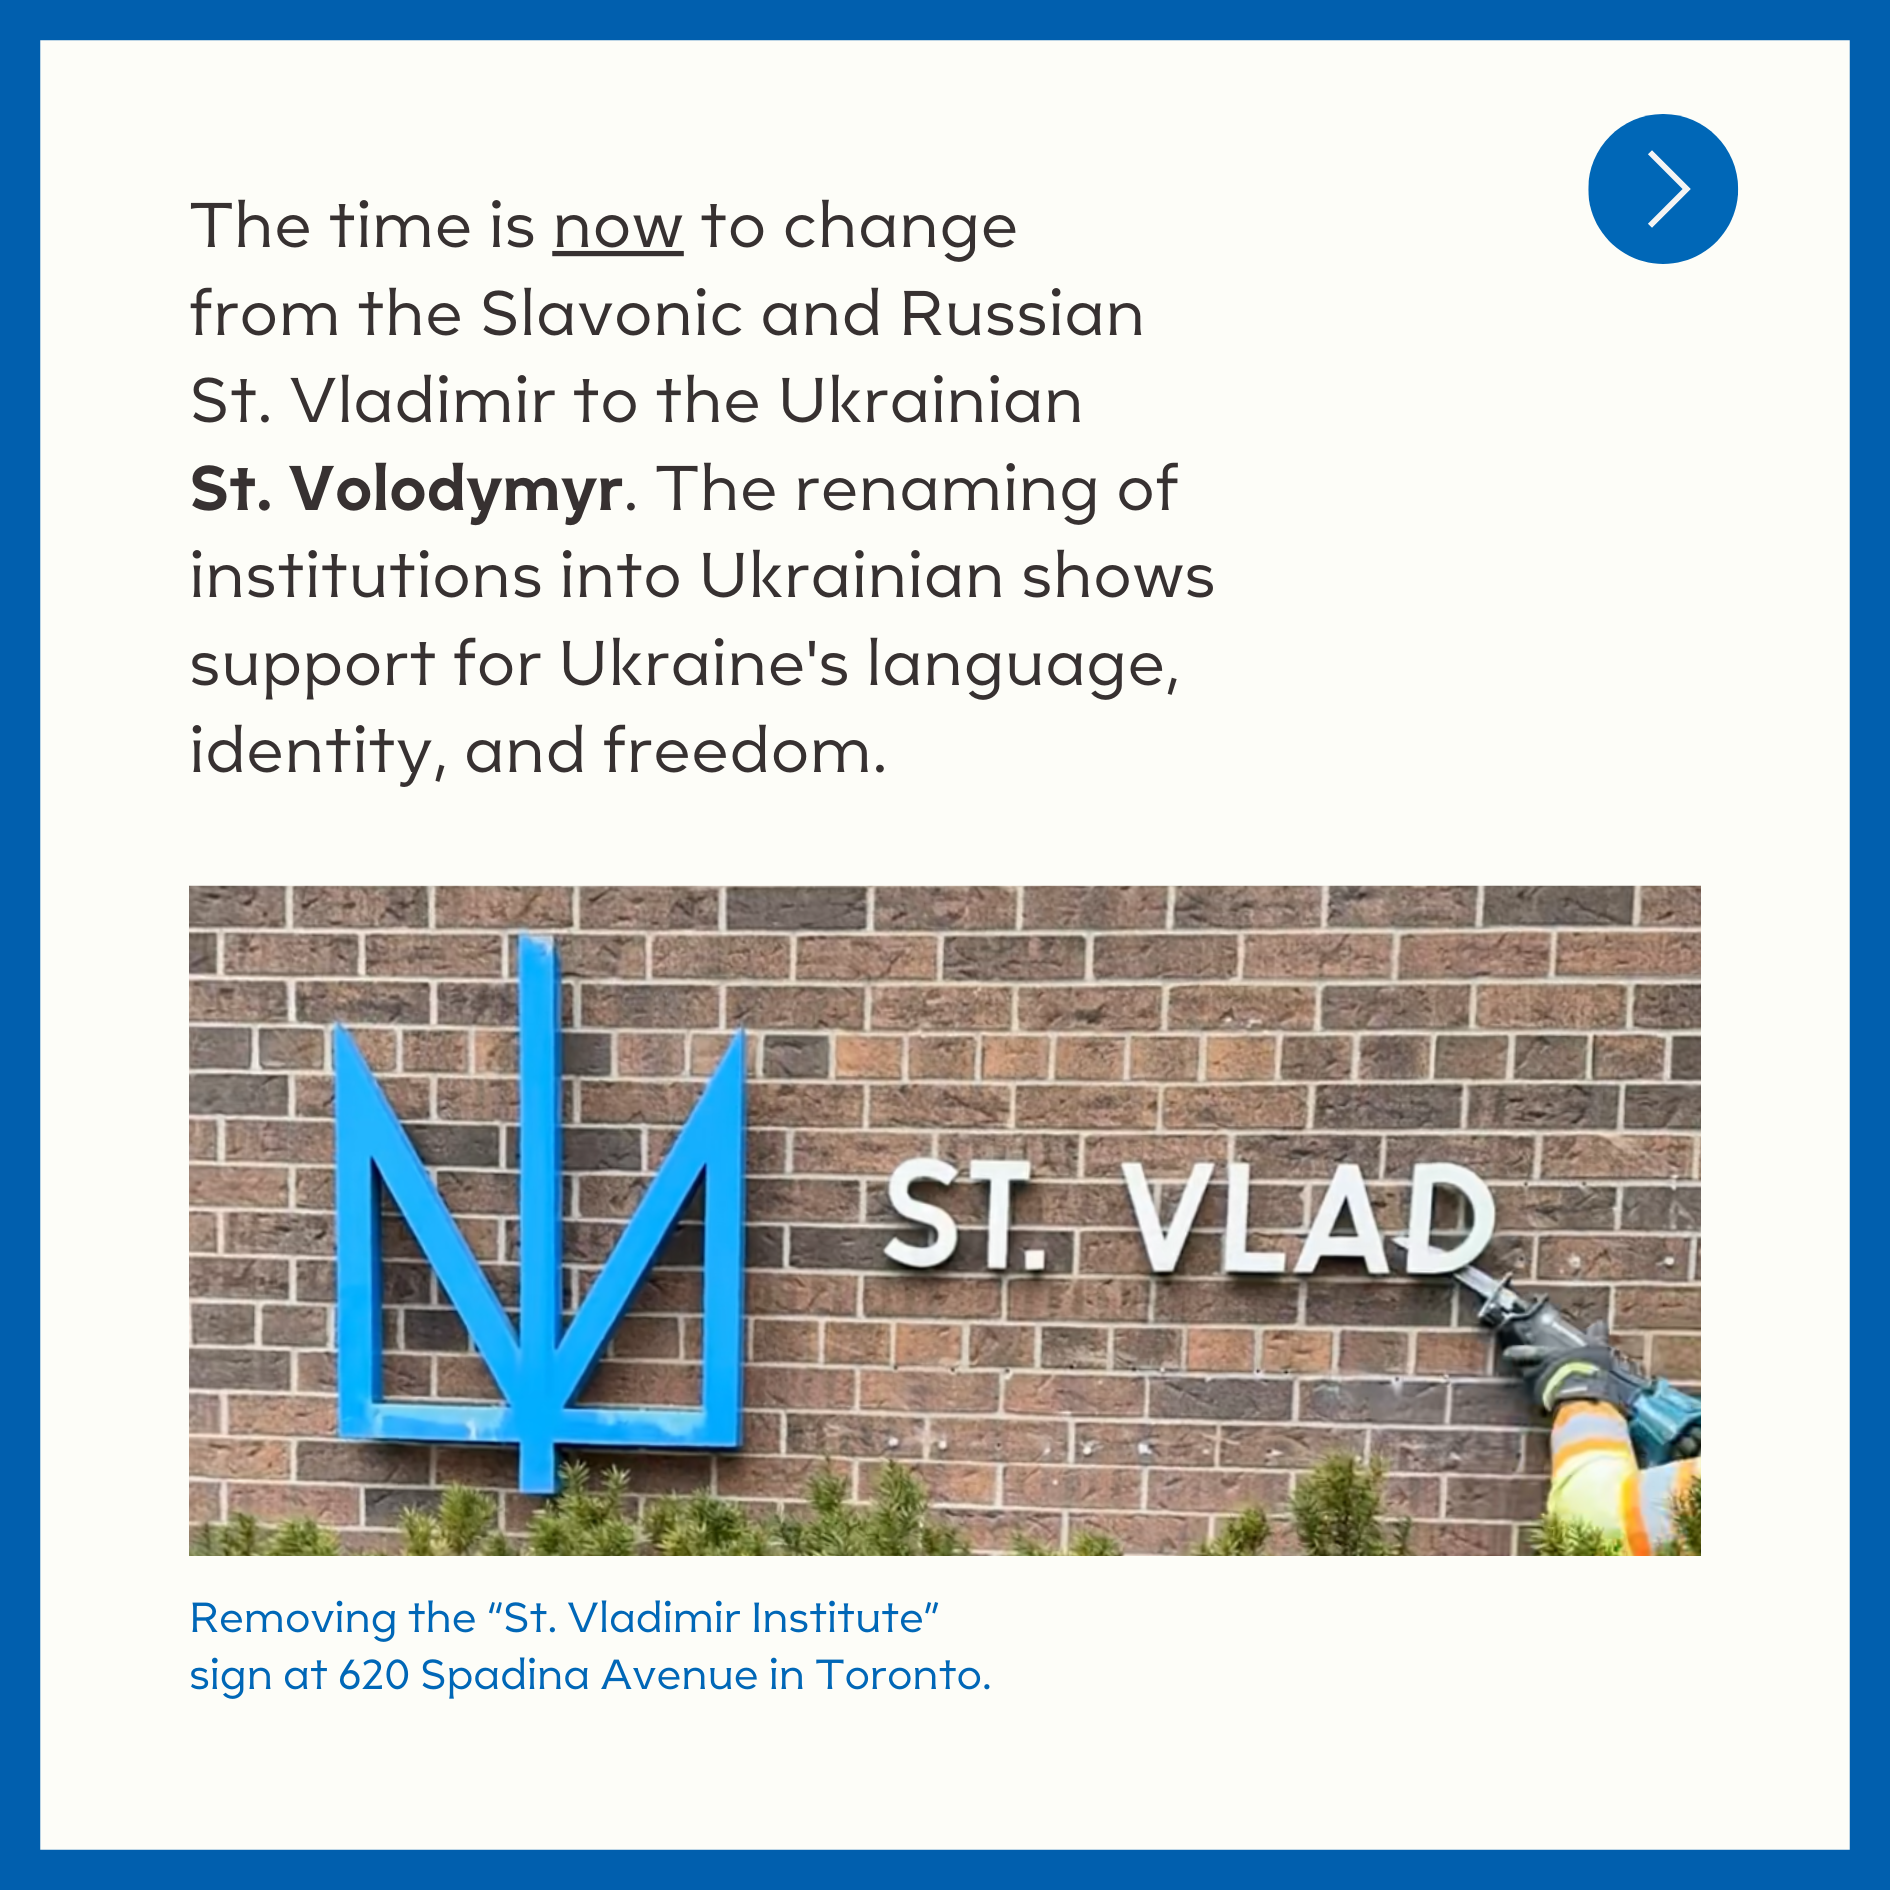  The time is now to change from the Slavonic and Russian St. Vladimir to the Ukrainian St. Volodymyr. The renaming of institutions into Ukrainian shows support for Ukraine's language, identity, and freedom.  Image: Removing the “St. Vladimir Institut